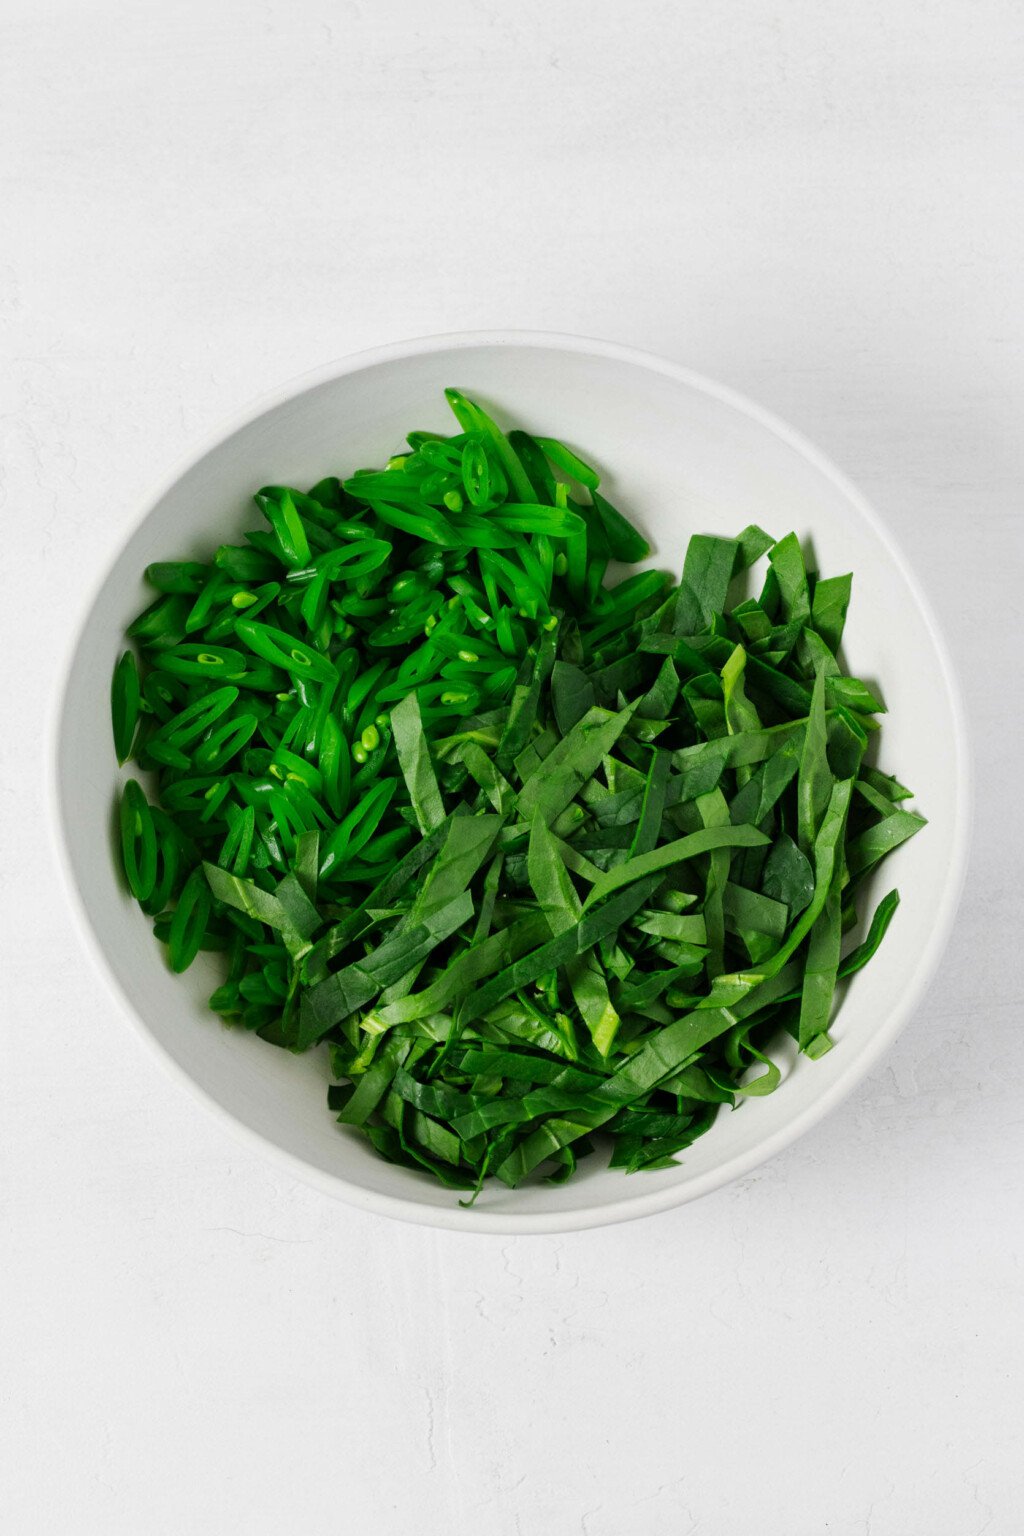 An overhead image of a mixing bowl, which contains thinly sliced snap peas and baby spinach leaves.